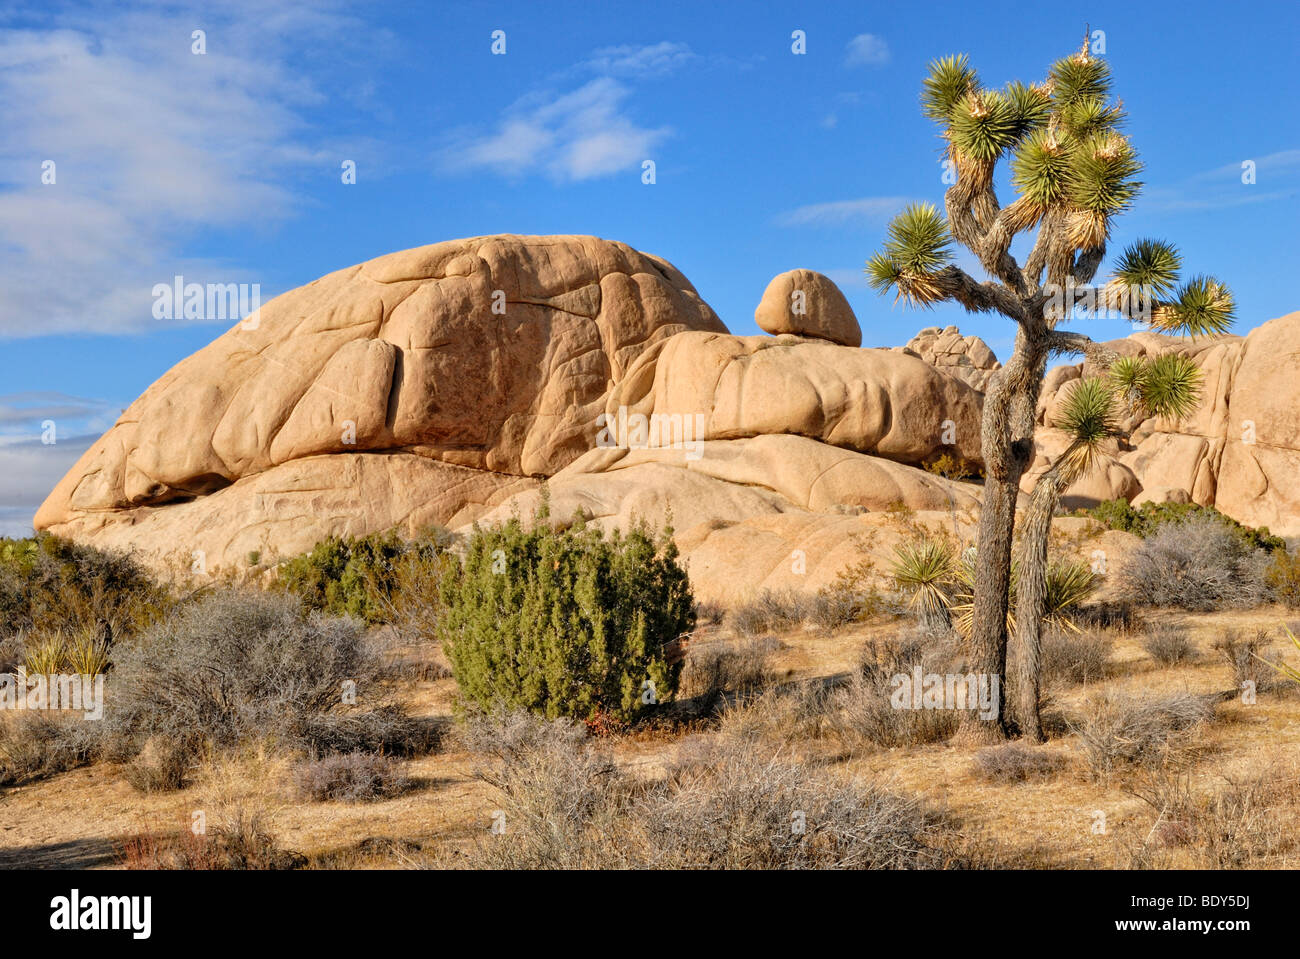 Joshua Tree (Yucca brevifolia) in front of monzogranite formations, Joshua Tree National Park, Palm Desert, Southern California Stock Photo